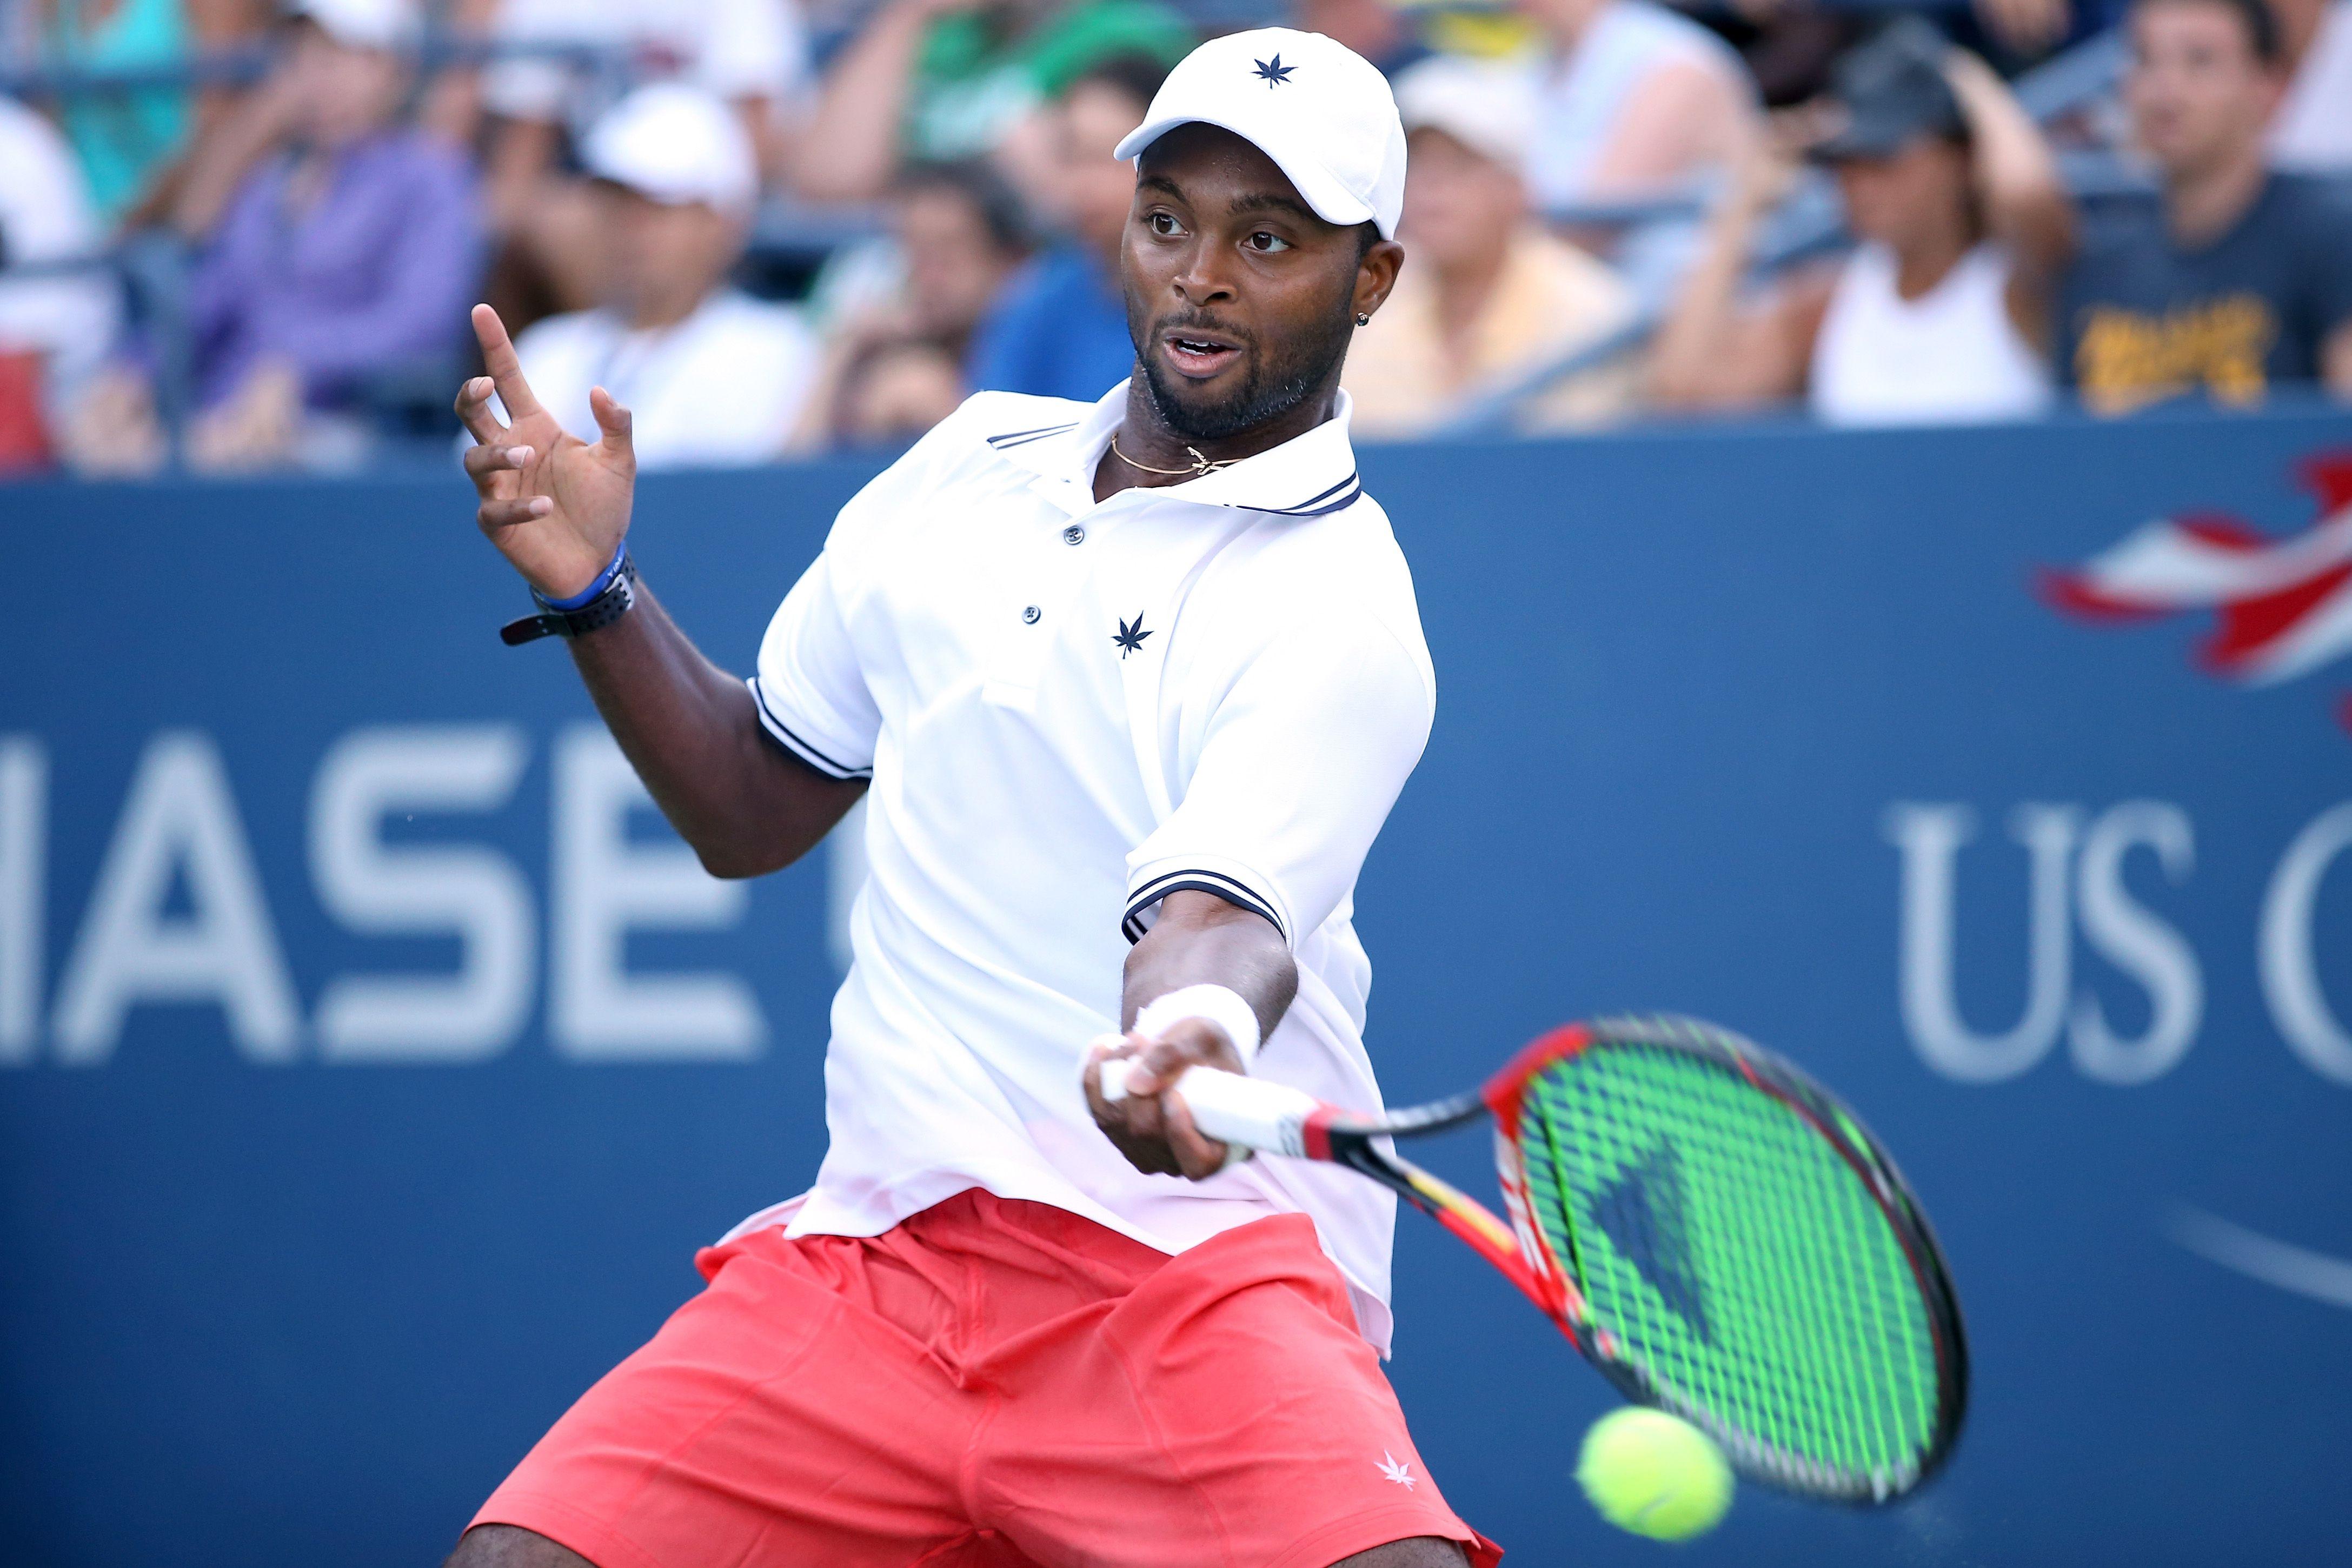 Tennis Shirt Brand Logo - Tennis Brand Boast Gets Boost at U.S. Open From Donald Young